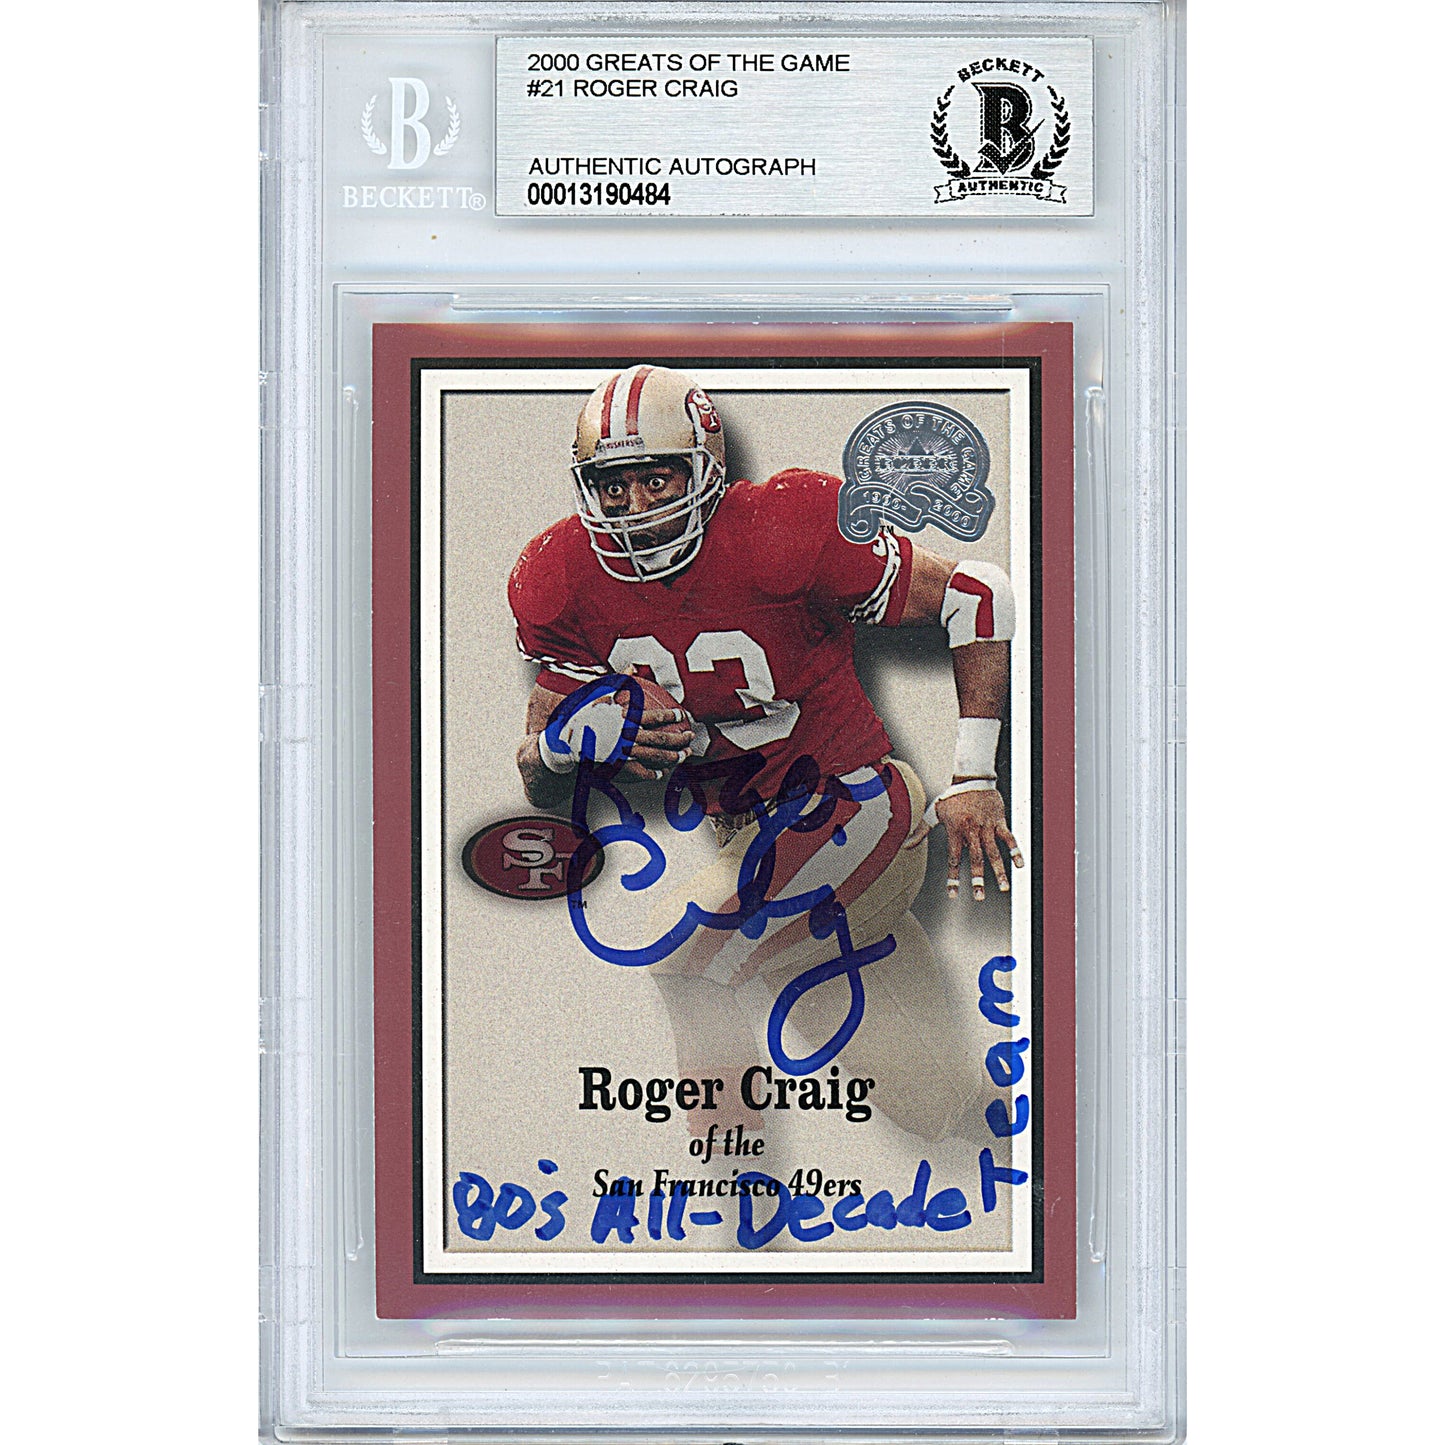 Footballs- Autographed- Roger Craig Signed San Francisco 49ers 2000 Fleer Greats of the Game Football Card Beckett BAS Authenticated Slabbed 00013190484 - 101